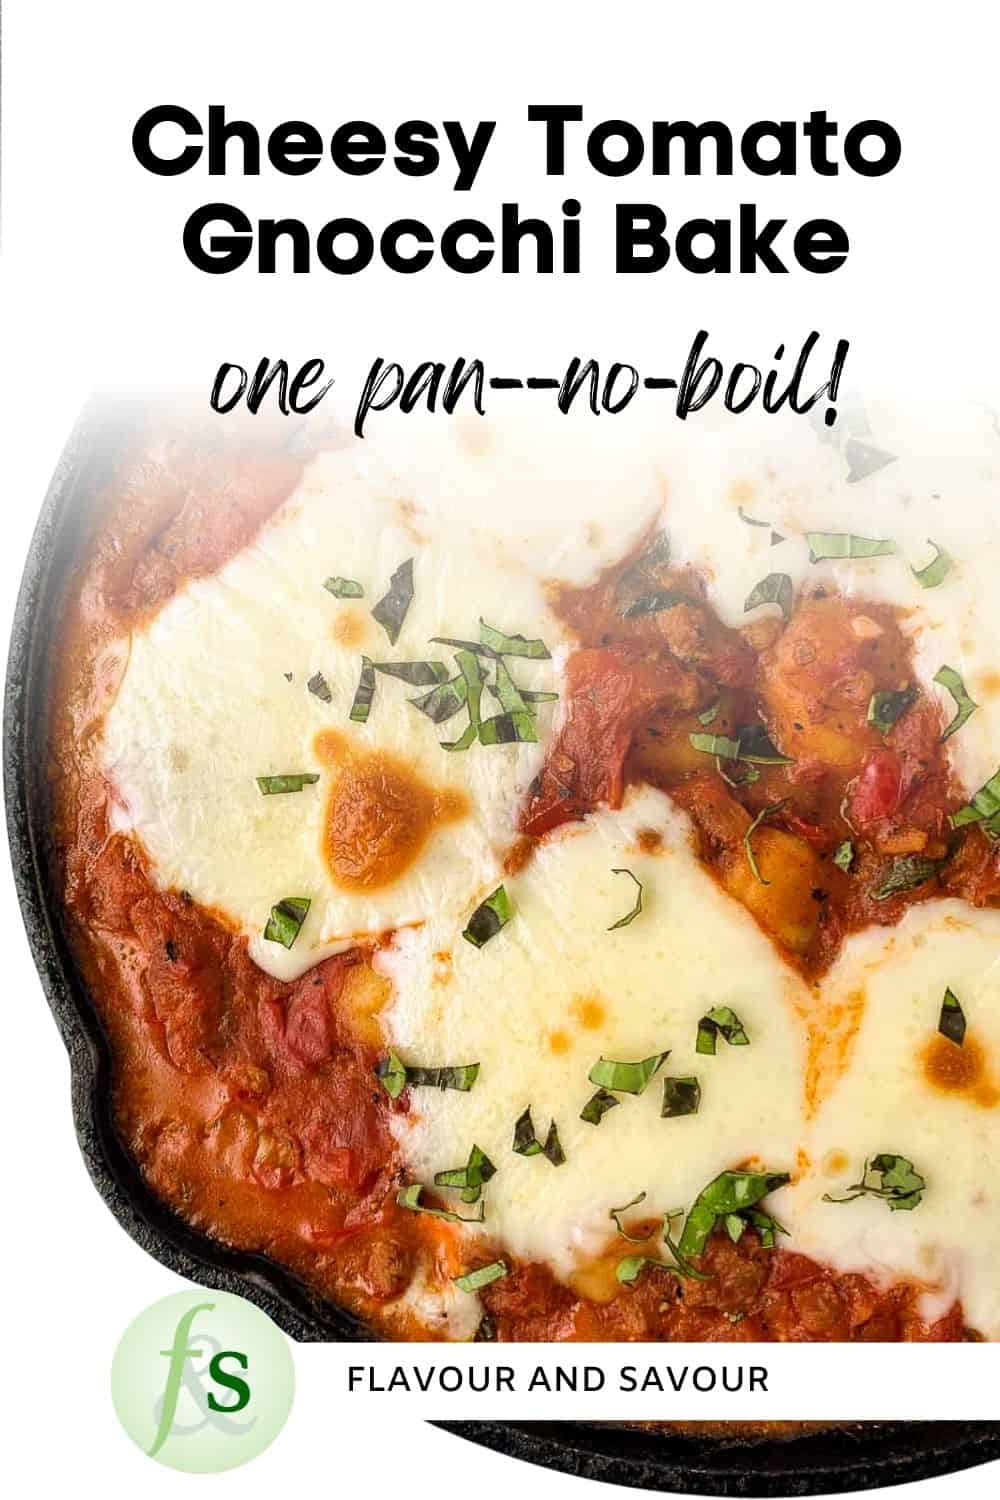 Image with text overlay for Cheesy Tomato Gnocchi Bake.